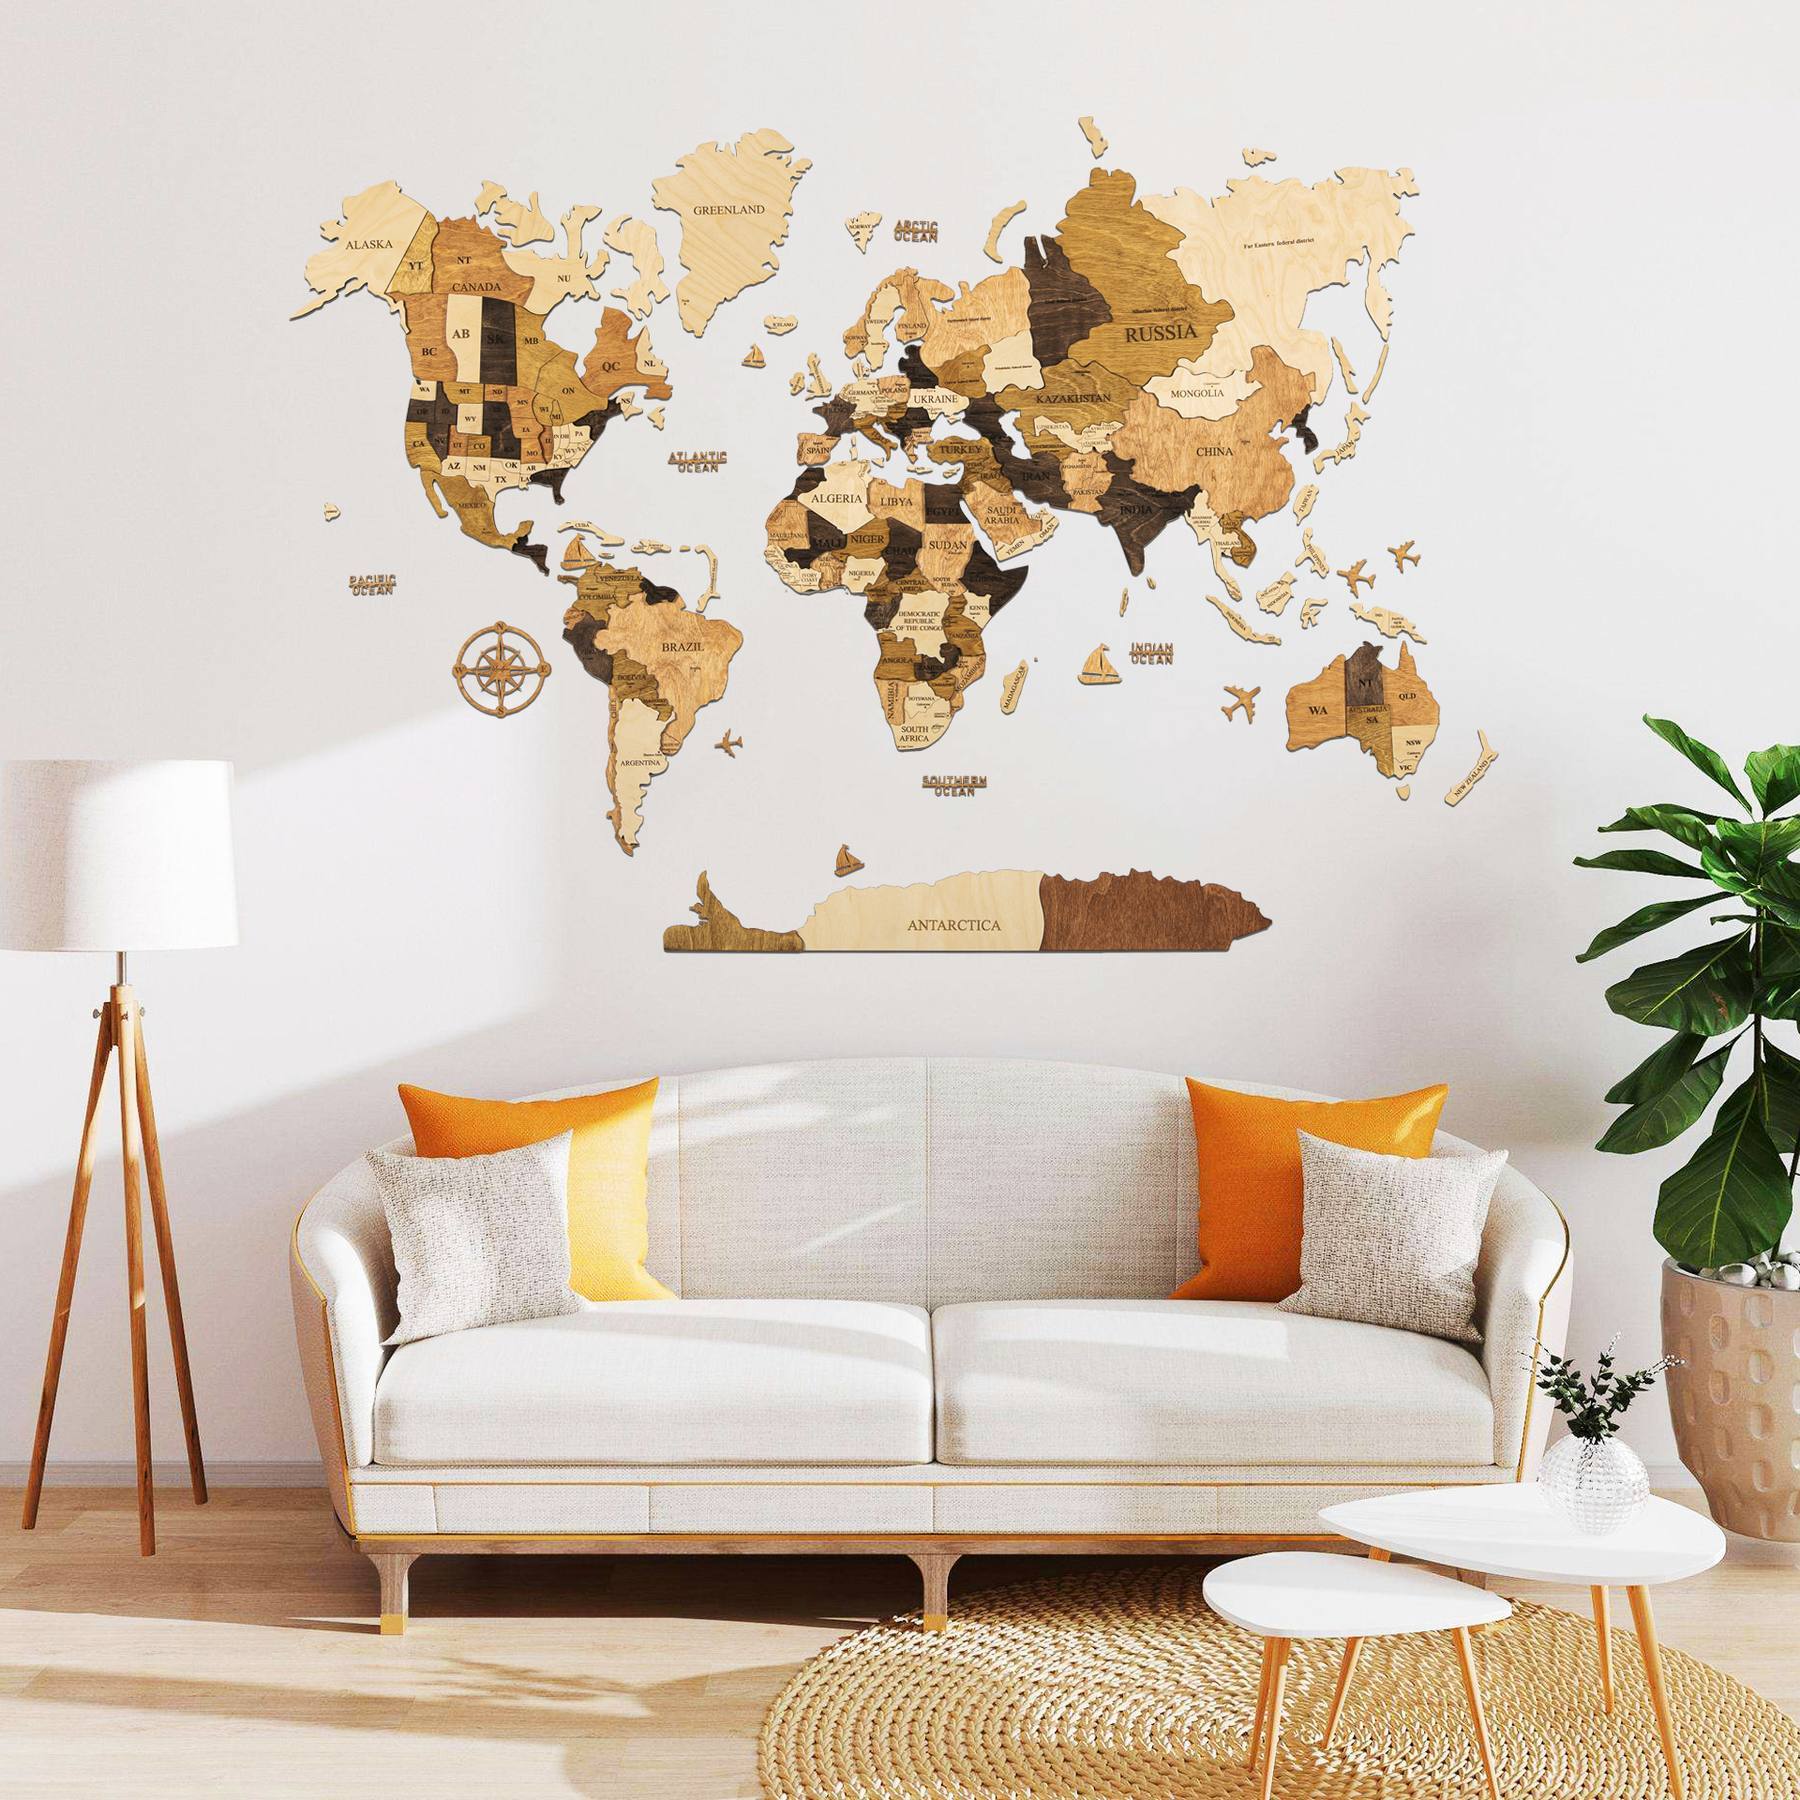 3D Wooden World Map - Multicolored 01 L Blank Map